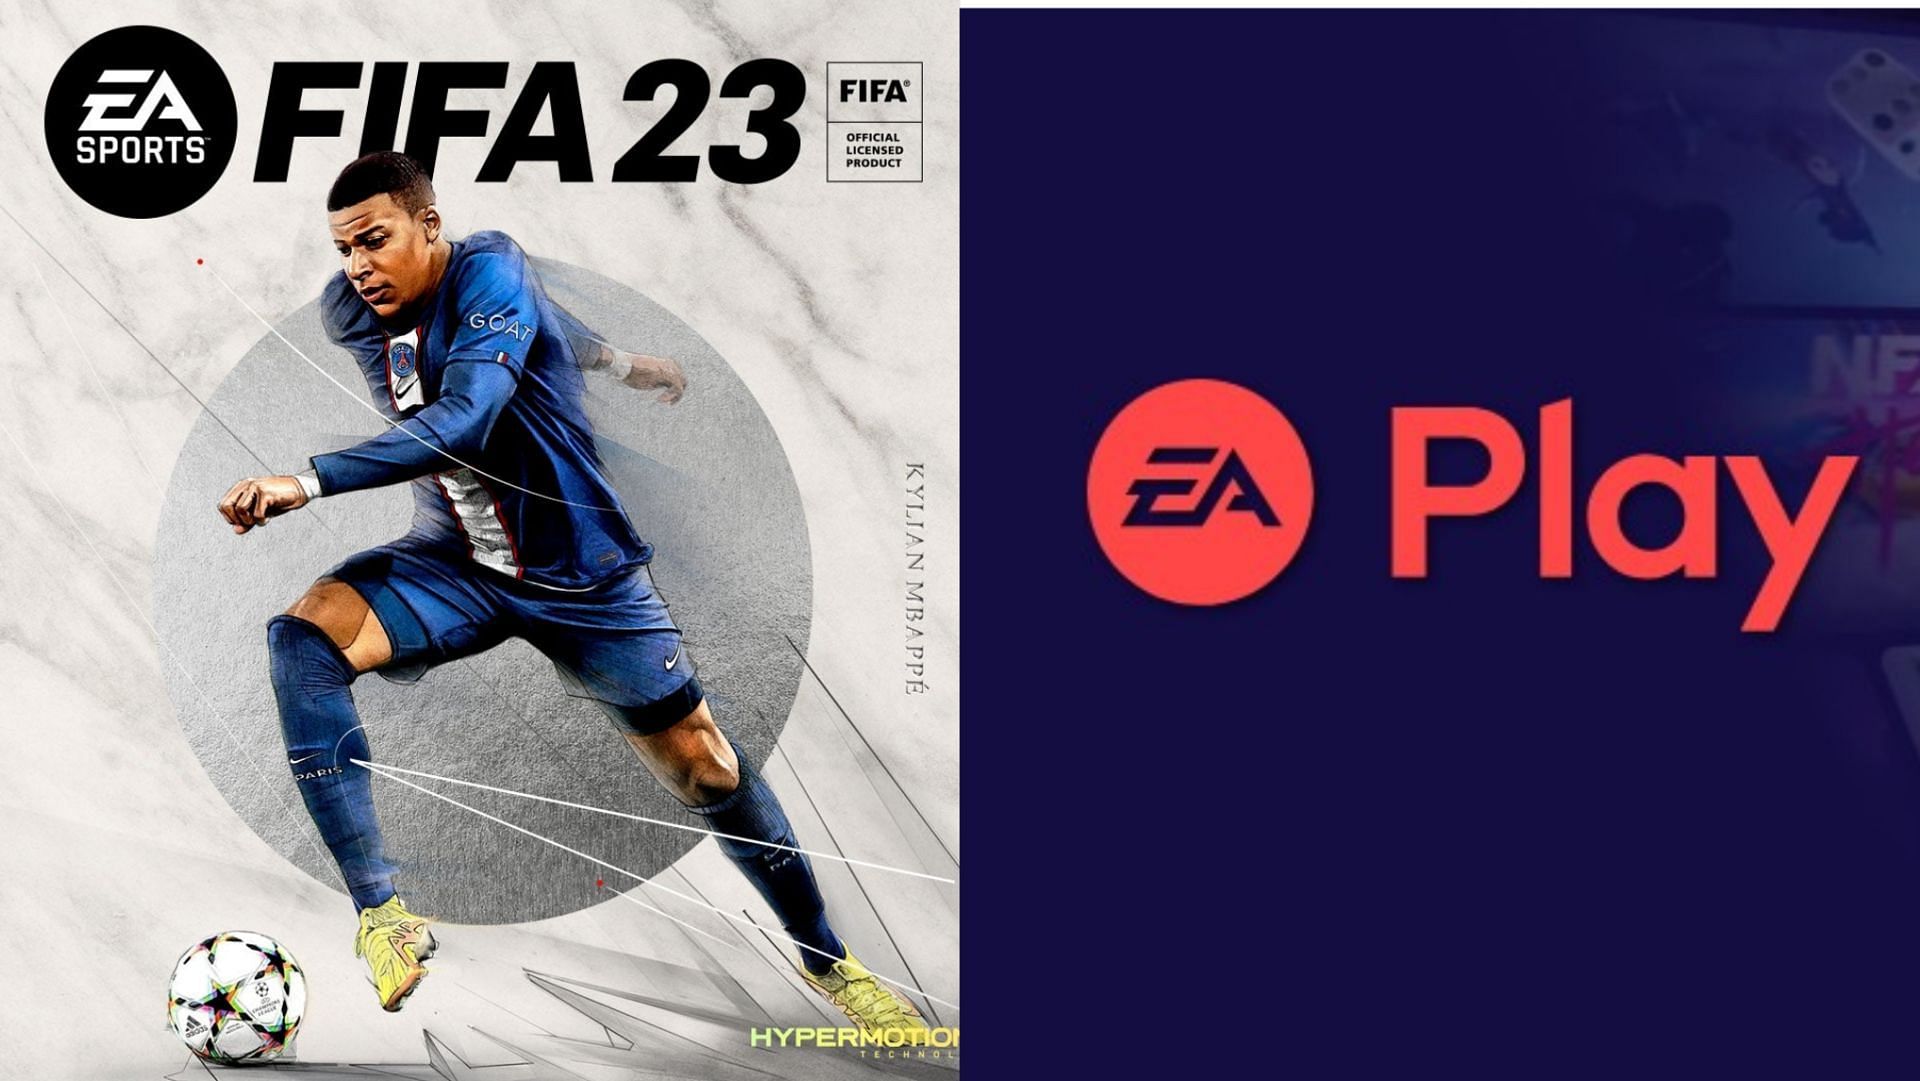 Will FIFA 23 ever go lower than this ? This promotional offer is